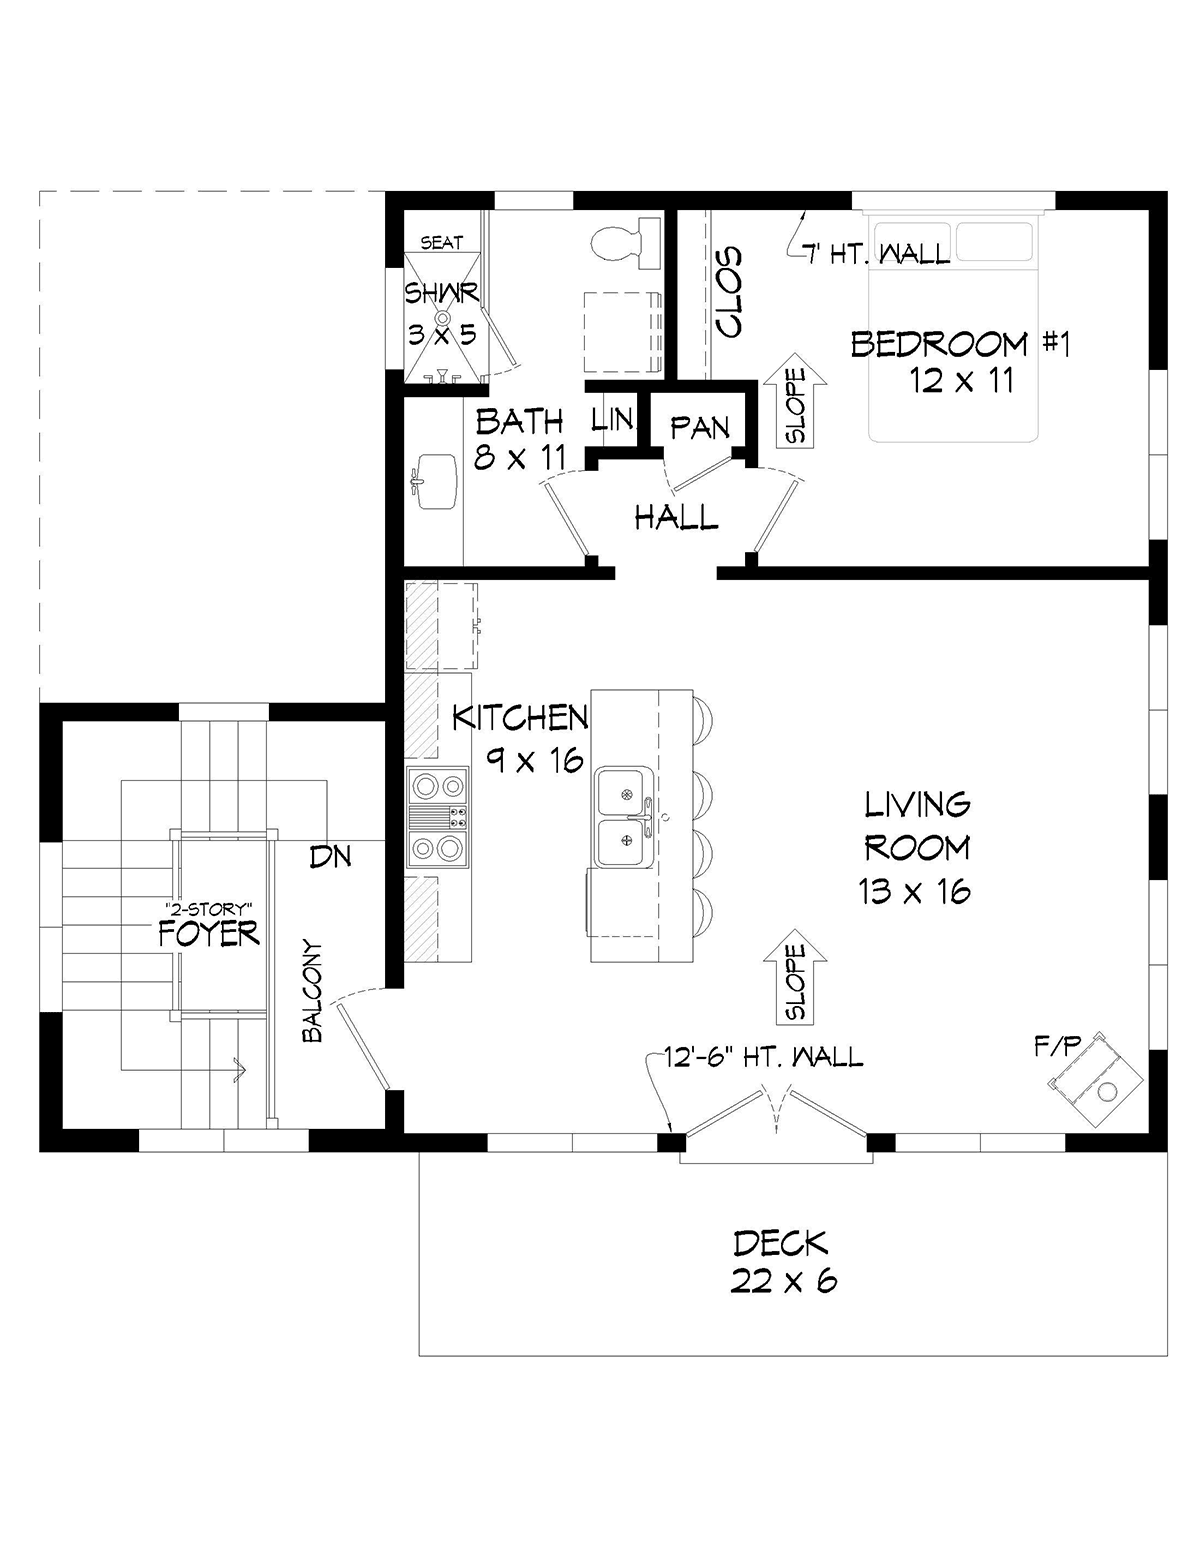 Contemporary, Modern House Plan 80988 with 1 Bed, 1 Bath, 3 Car Garage Level One